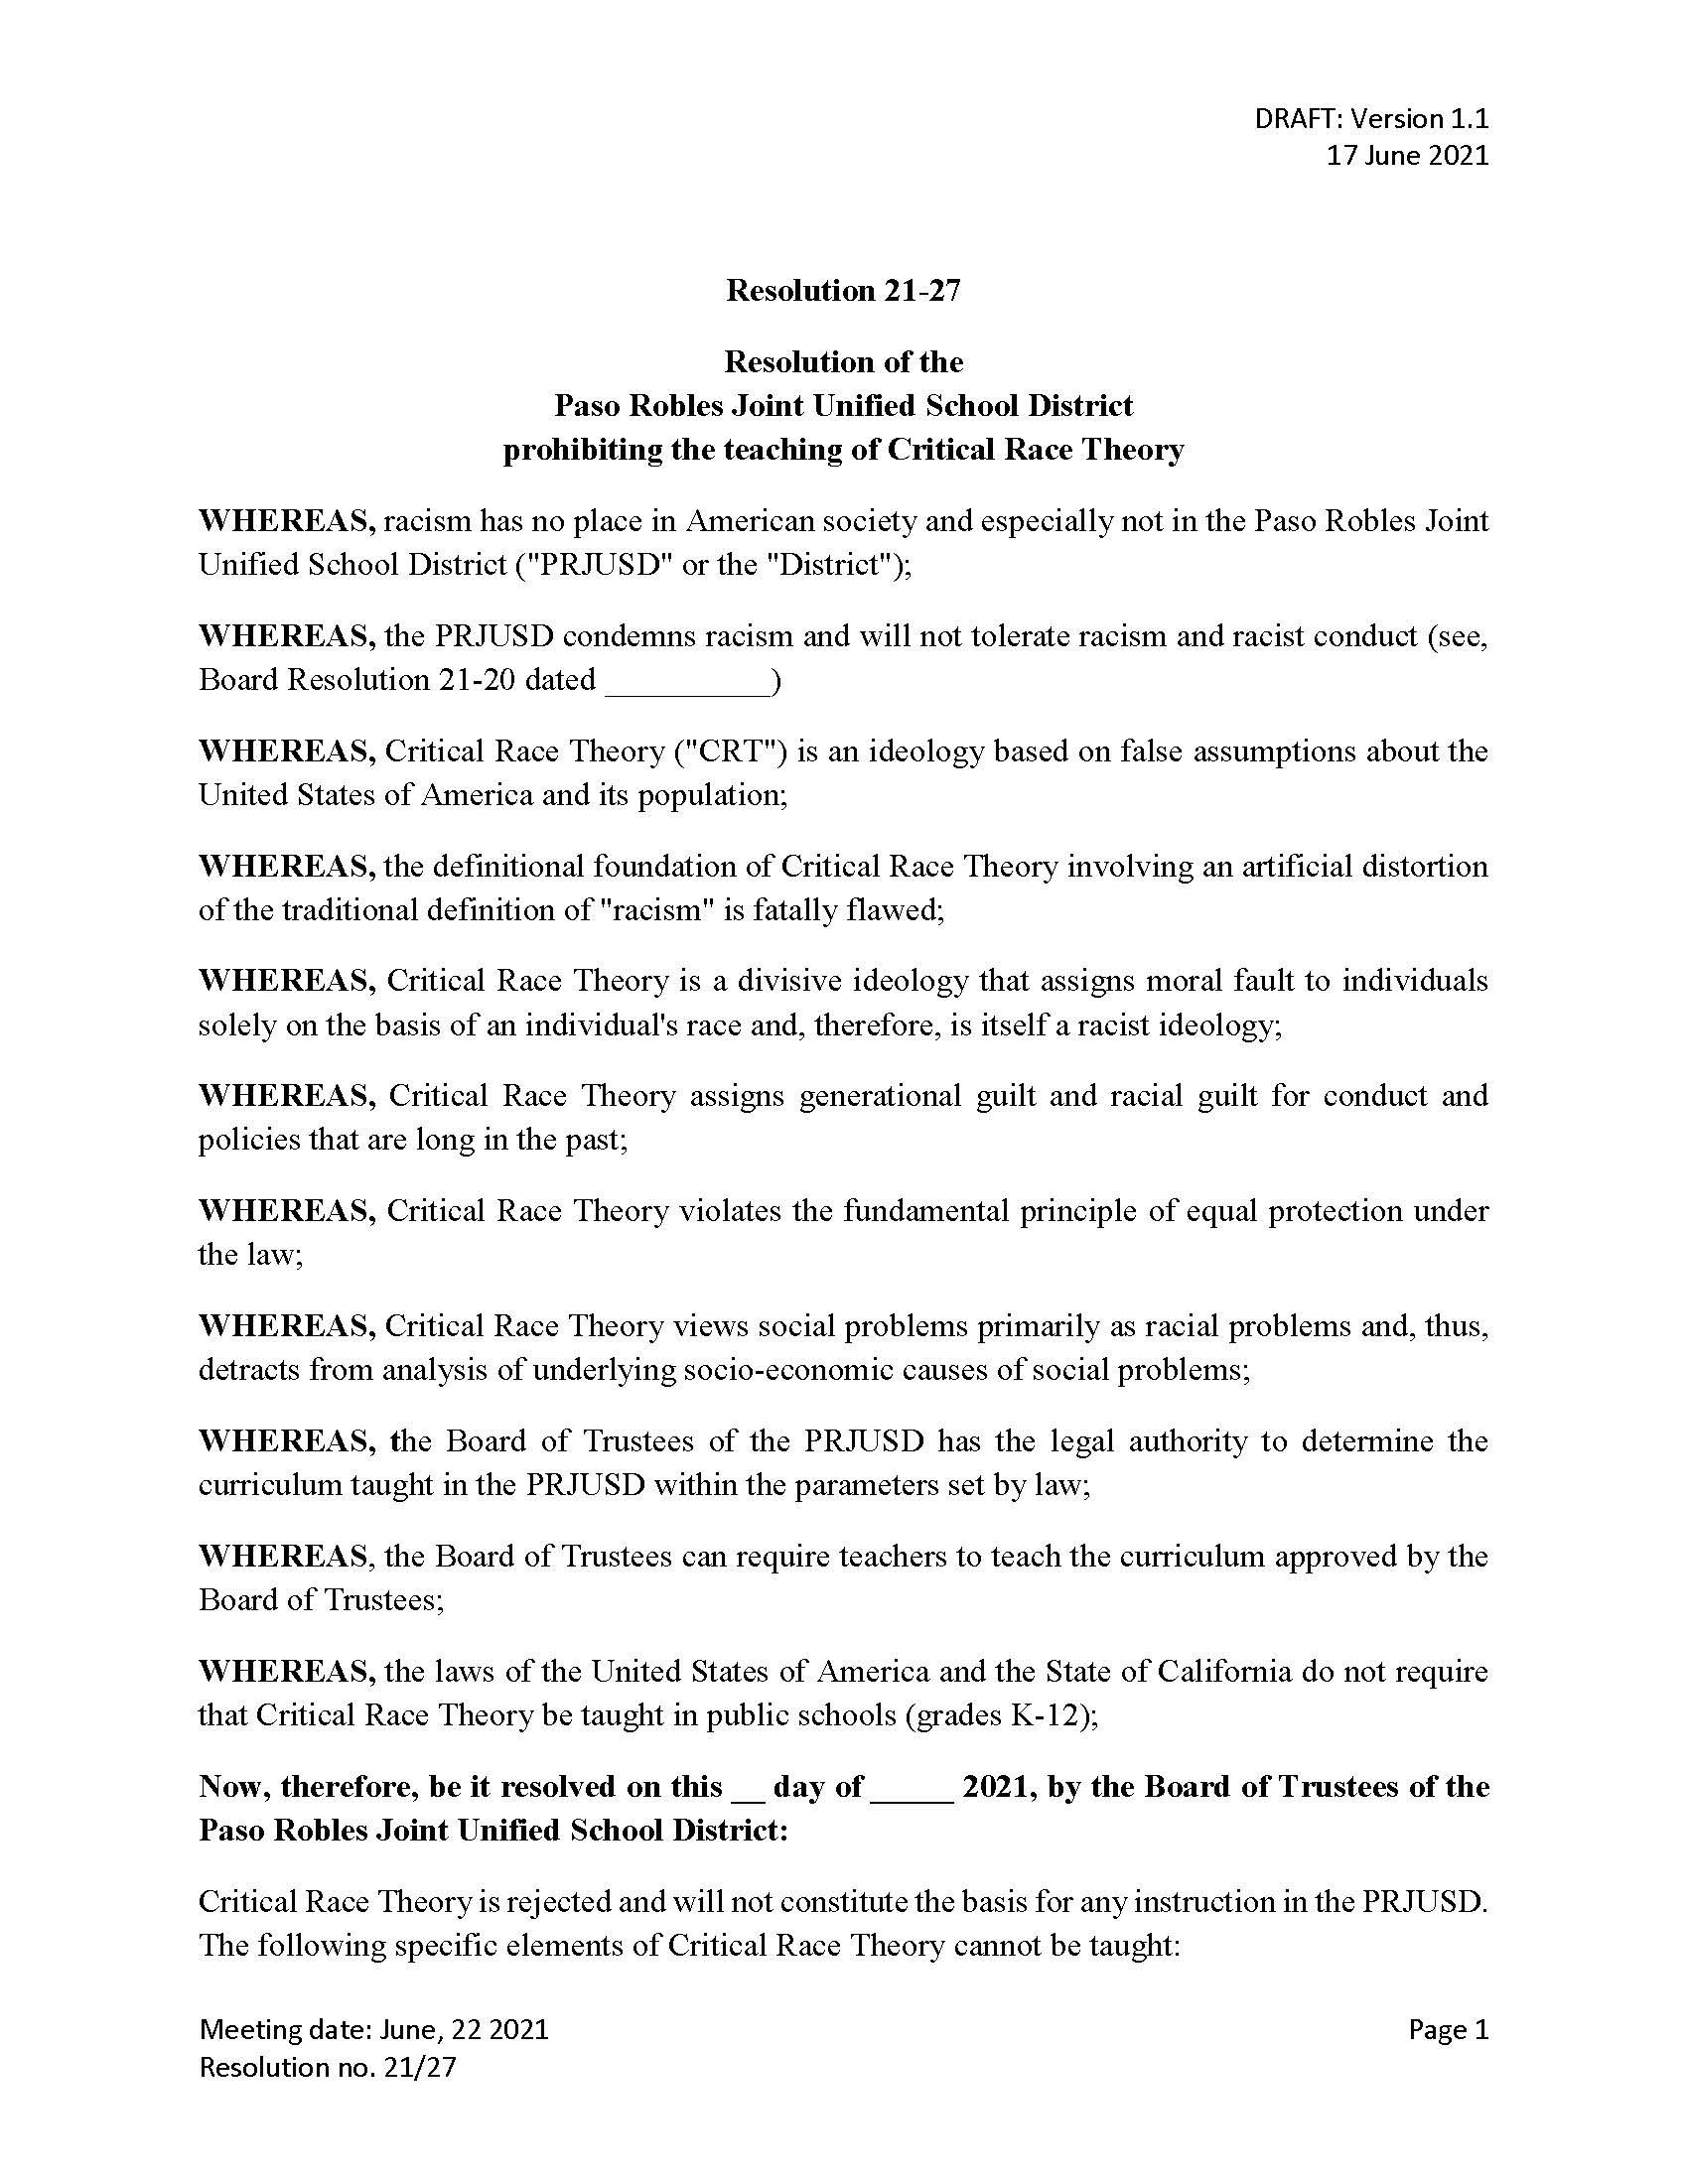 Paso Robles Joint Unified School District Critical Race Theory Resolution Page 1